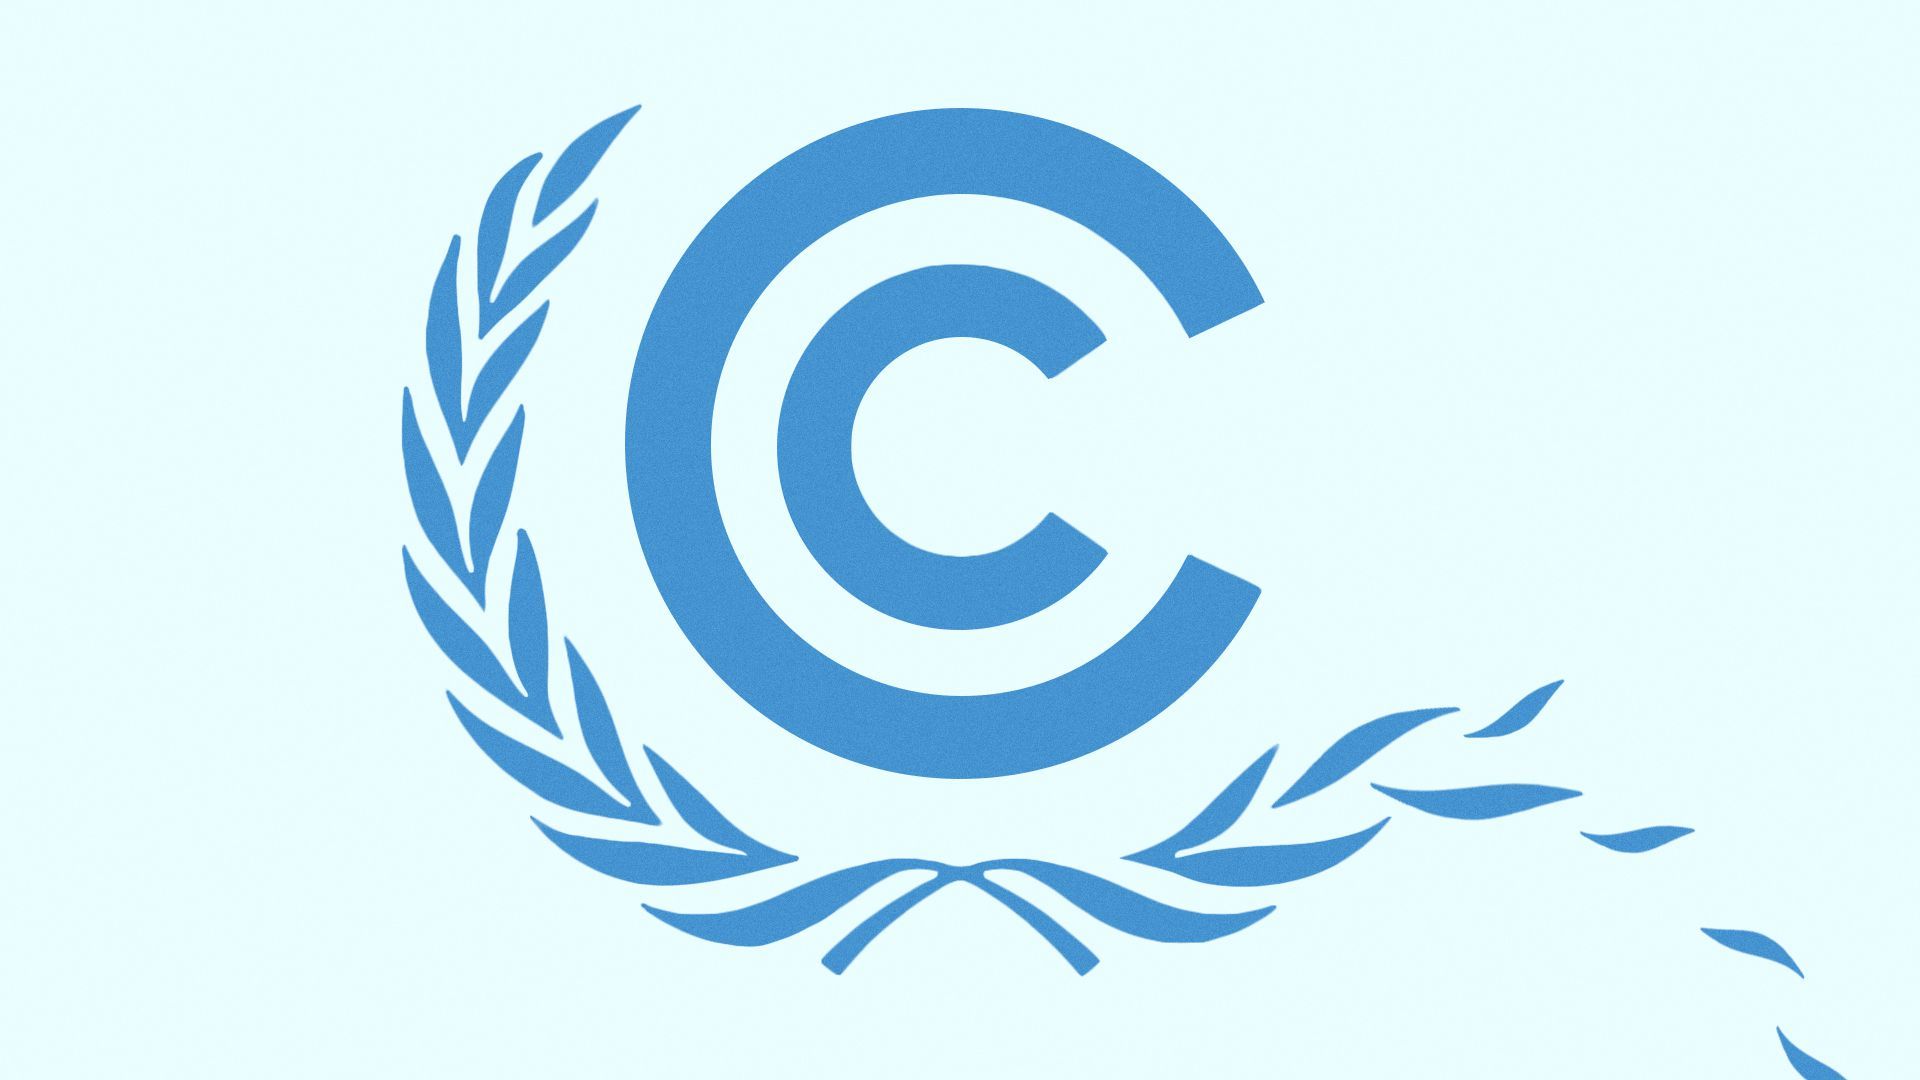 Illustration of the UN Climate Change logo with leaves falling from one of the branches.